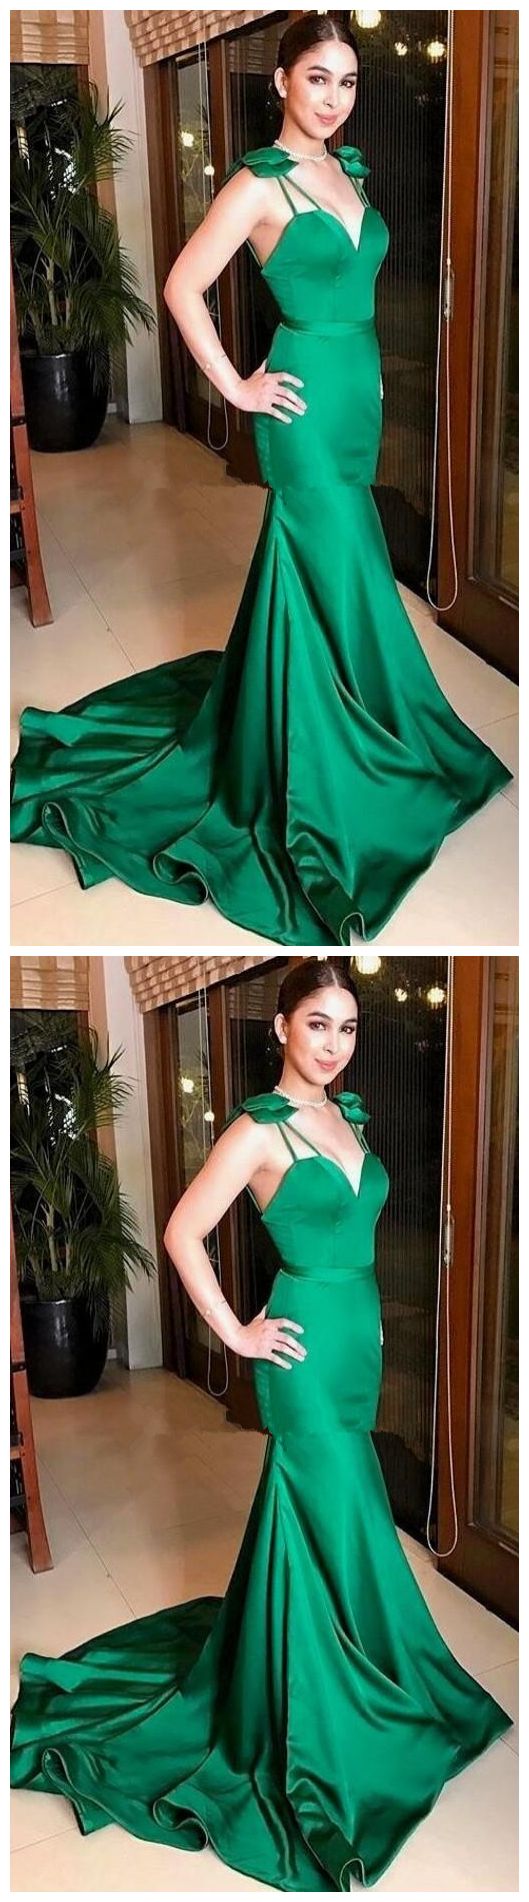 New Green Mermaid Prom Dresses Spaghetti Bow Sweep Train Long Formal Evening Party Gowns Special Occasion Dress   cg5872